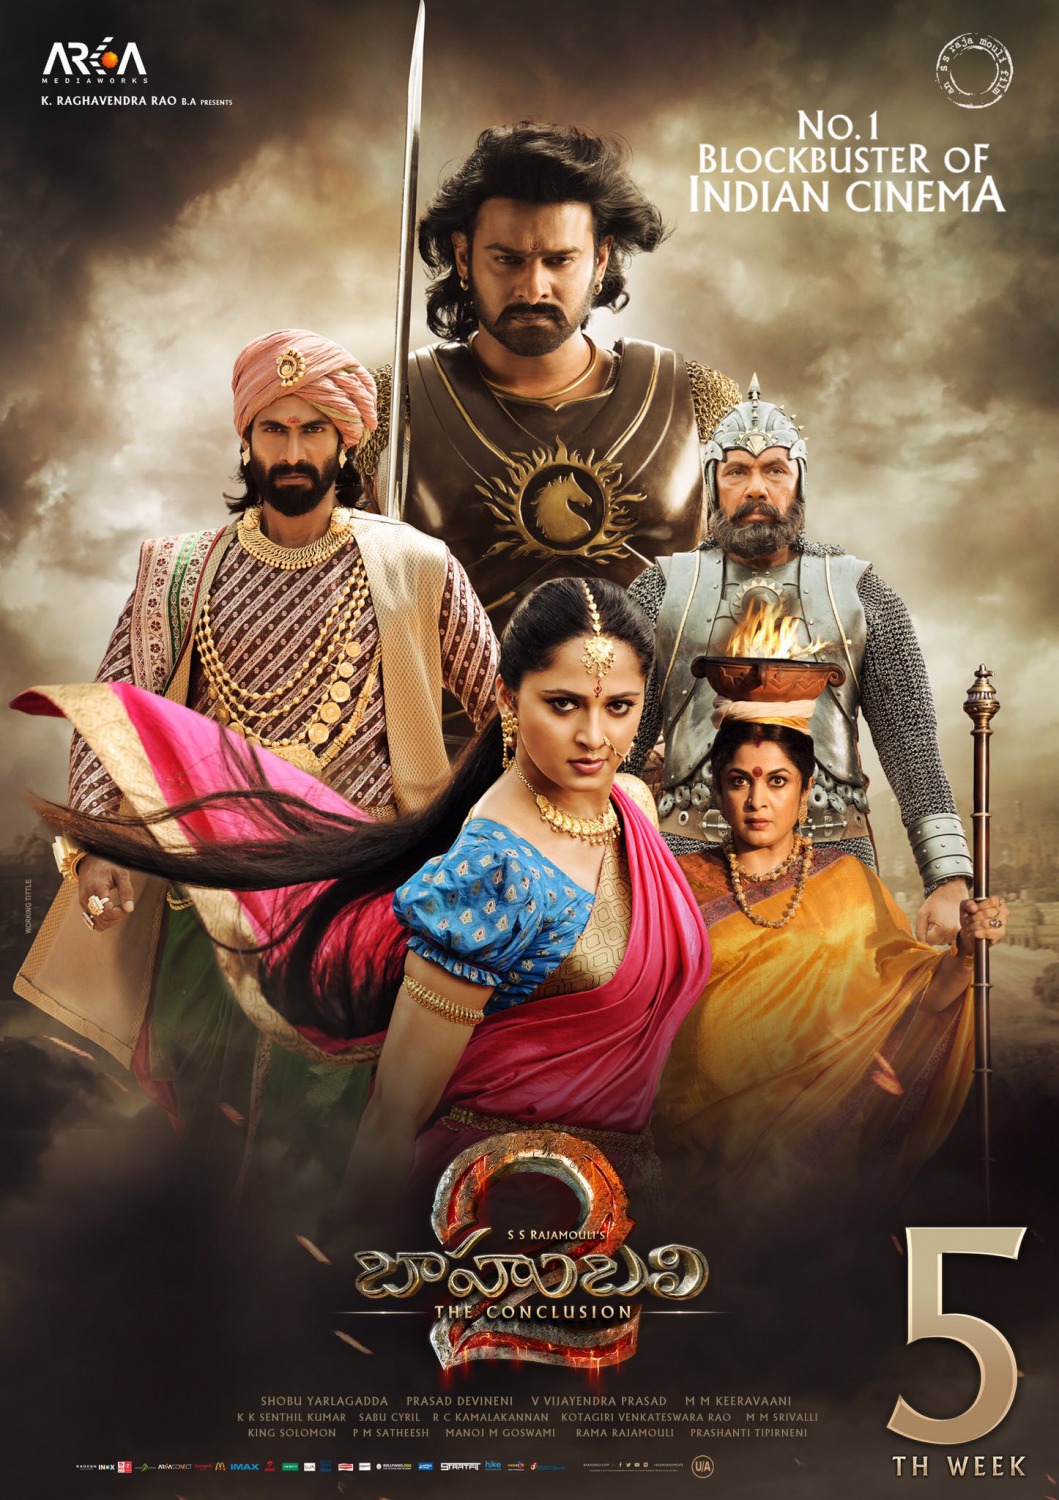 Extra Large Movie Poster Image for Baahubali 2: The Conclusion (#5 of 12)